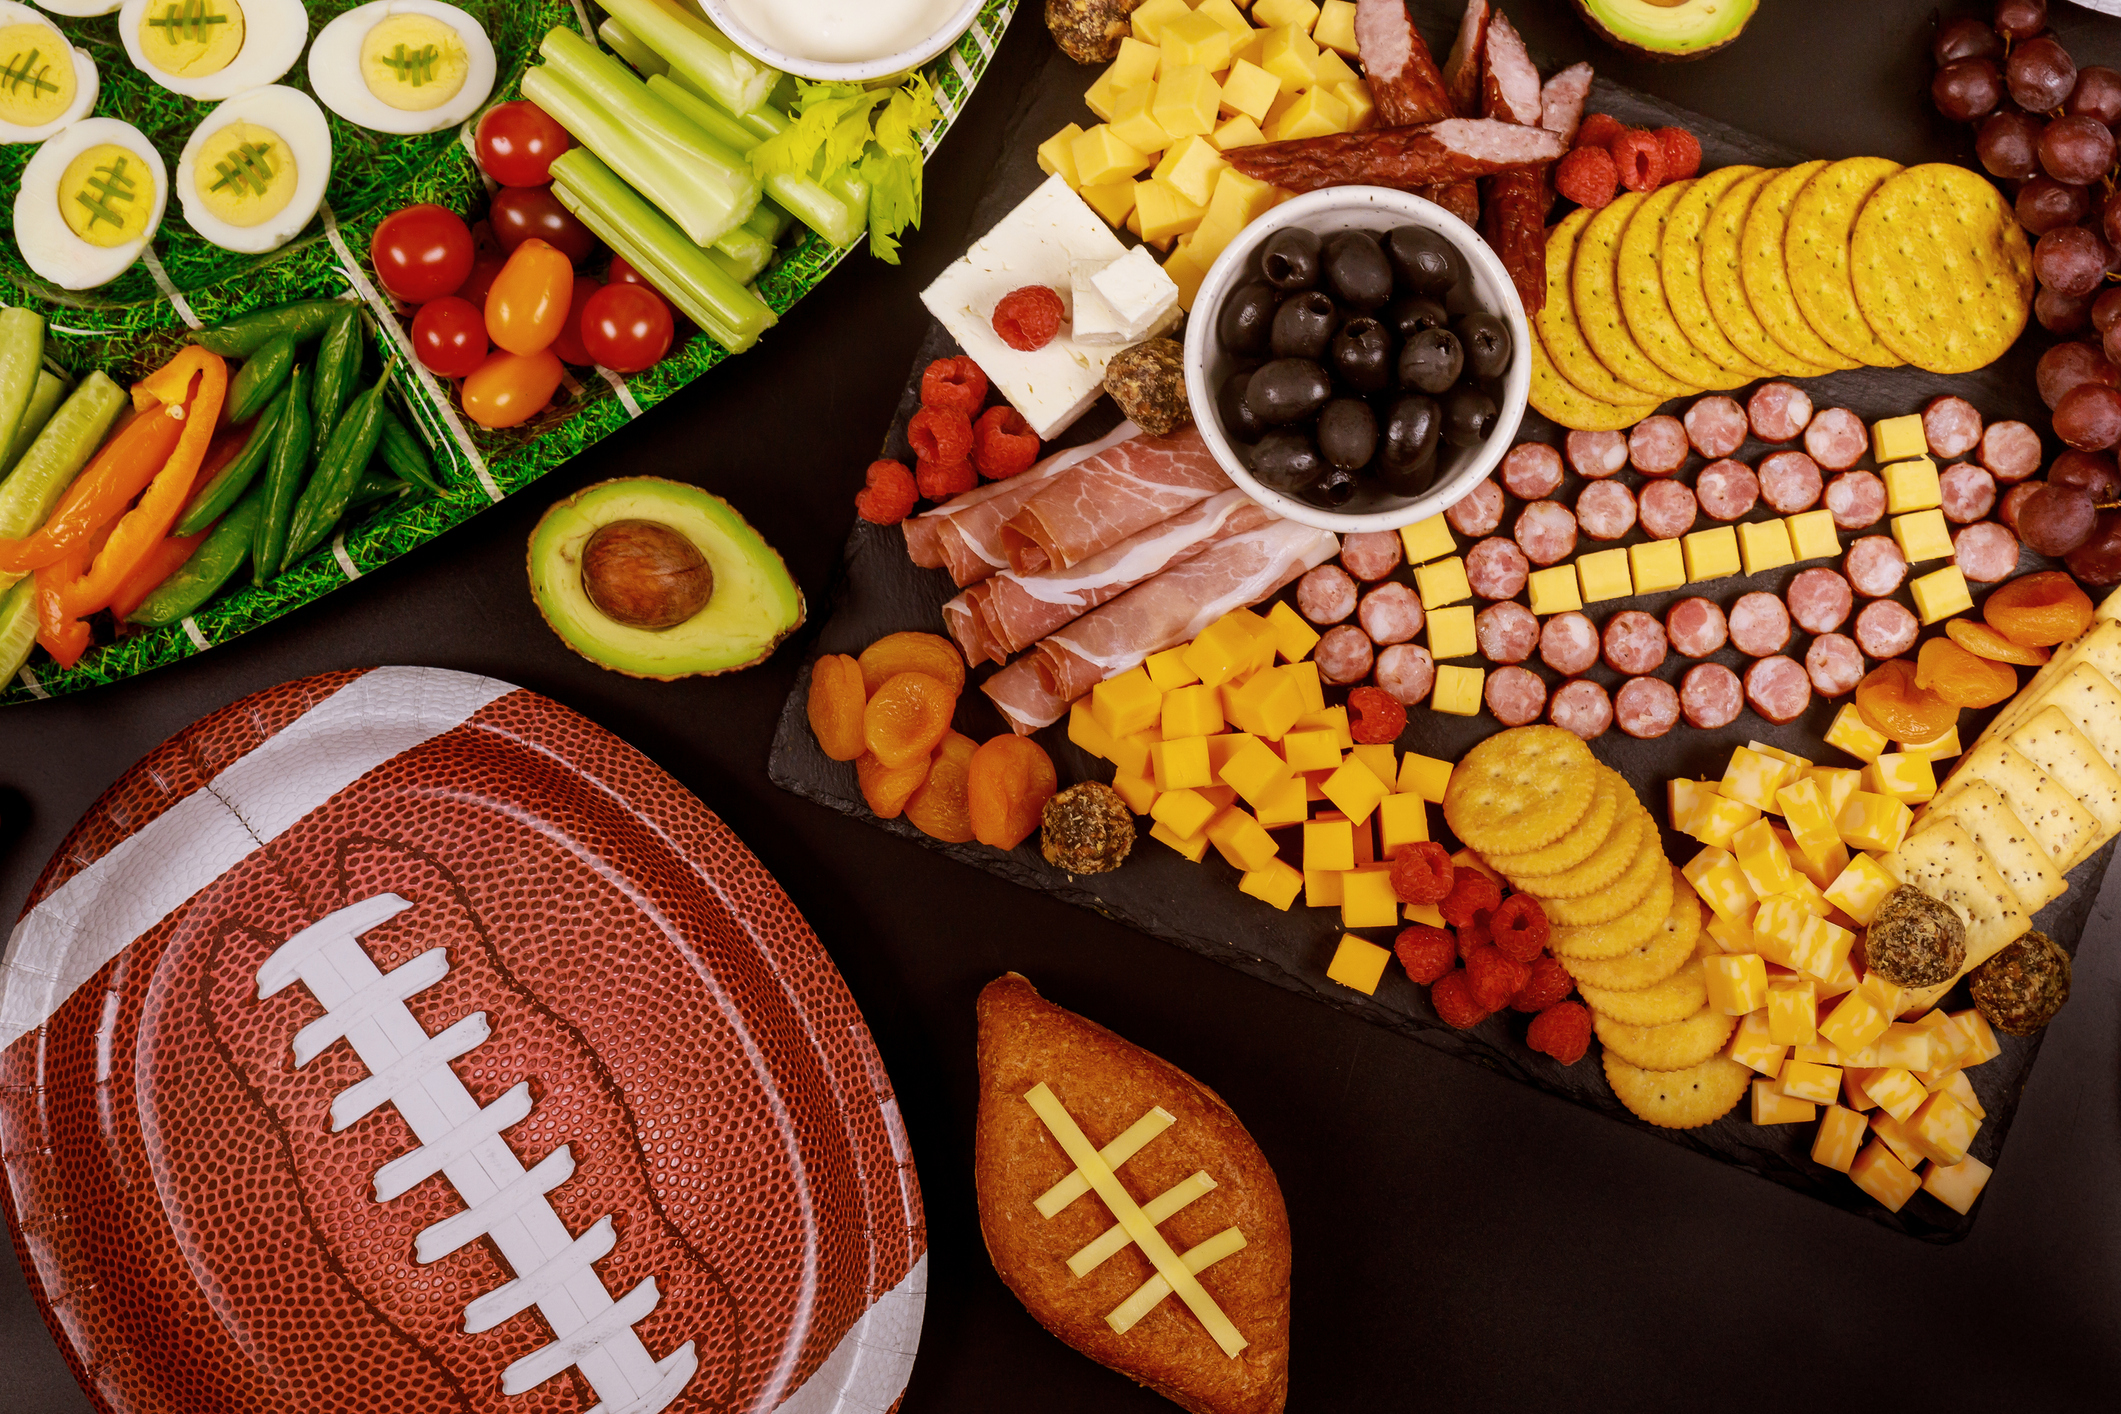 Healthy snacks, veggies, meat and cheeses with football plates